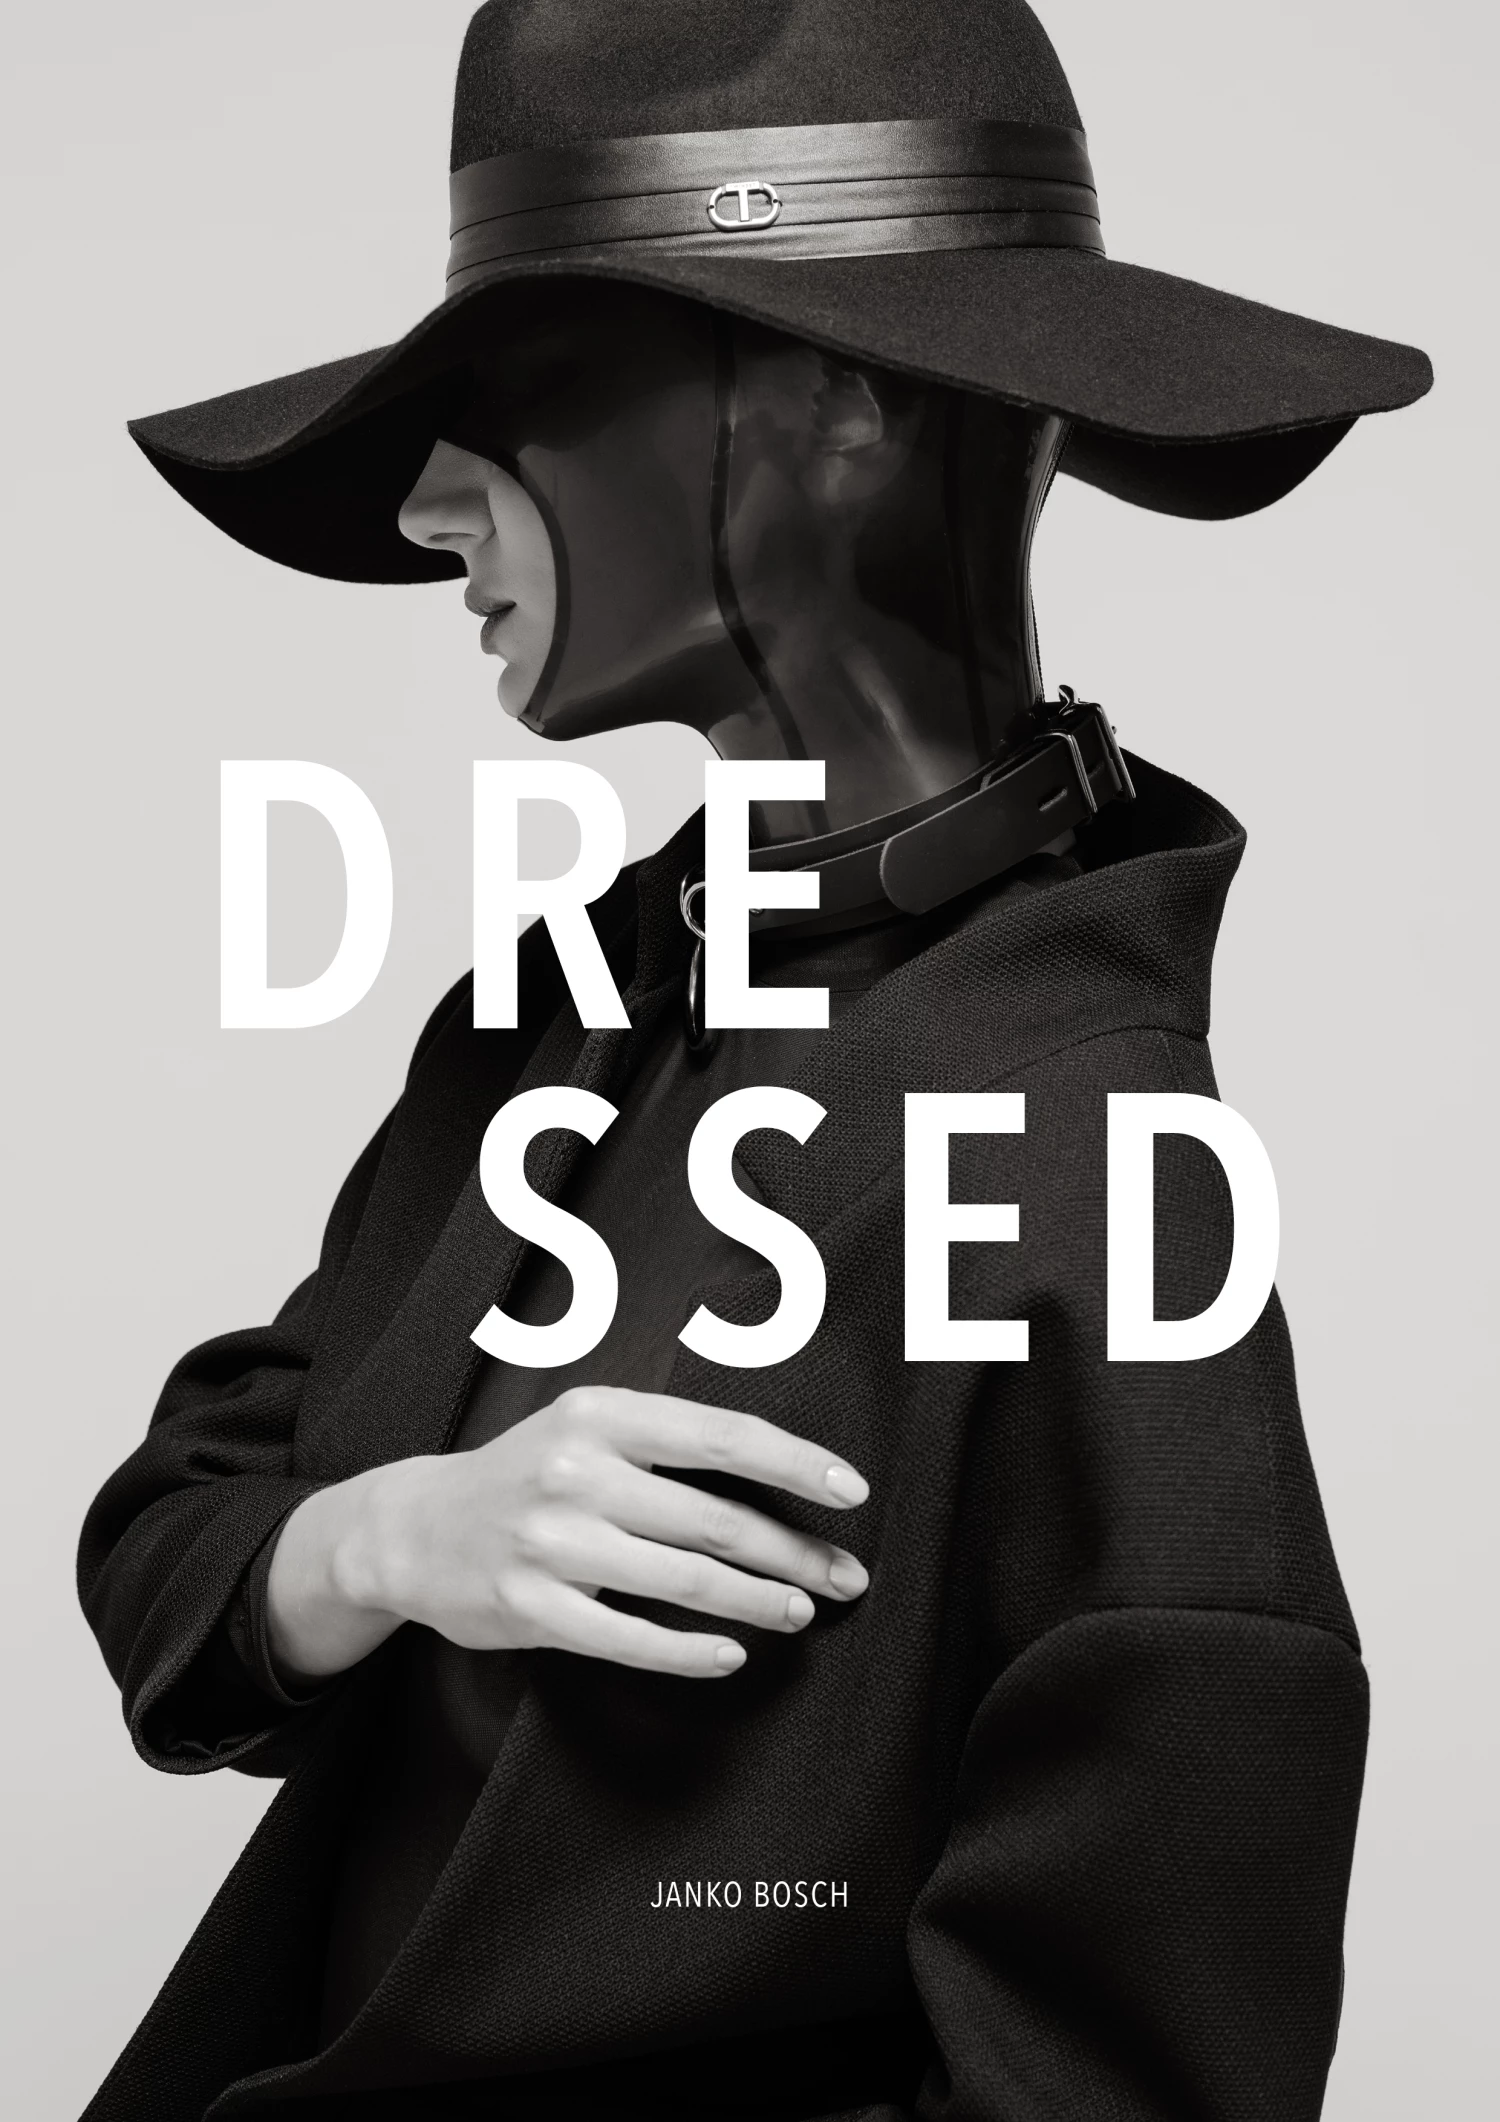 Cover of the photo book dressed